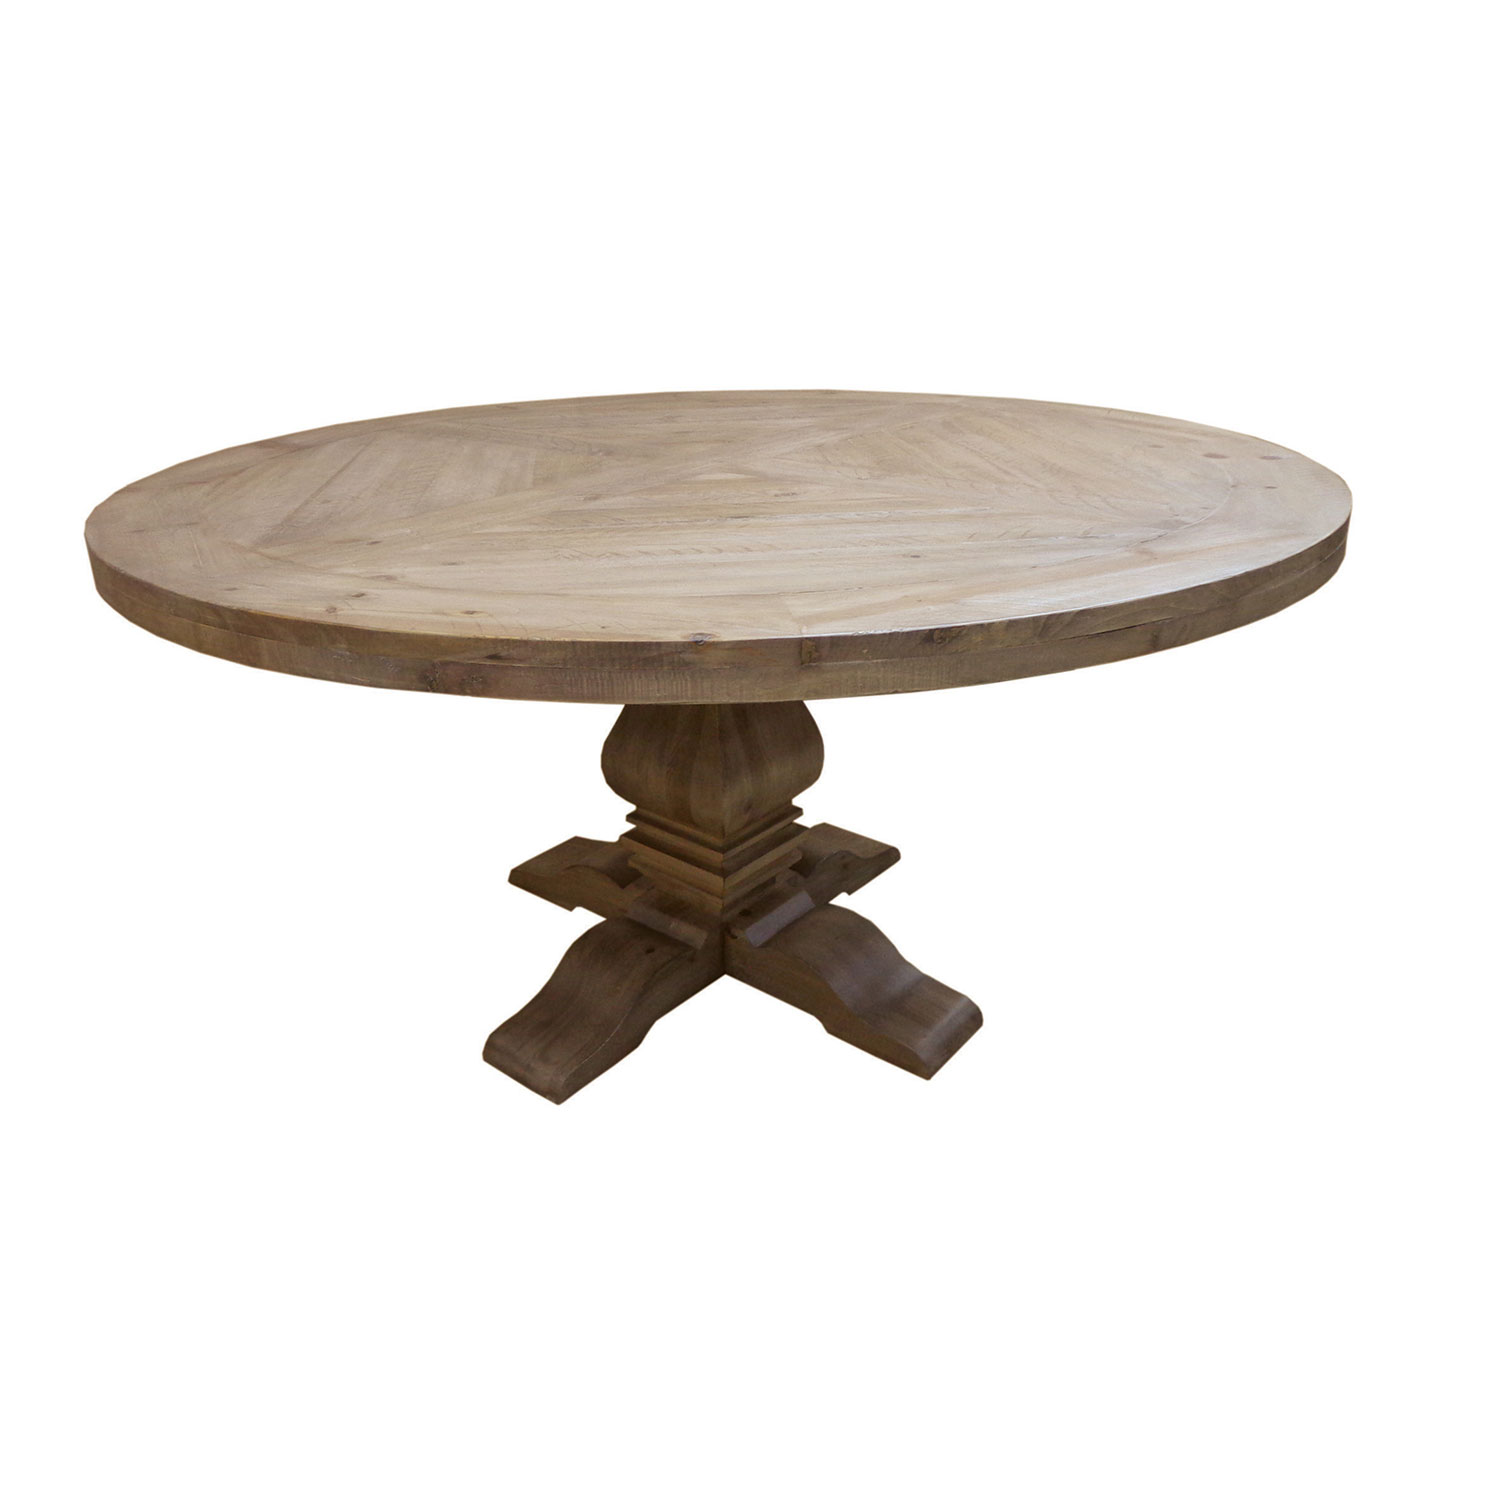 Round Pedestal Dining Table ... round dining table. hover to zoom IFCRFNO